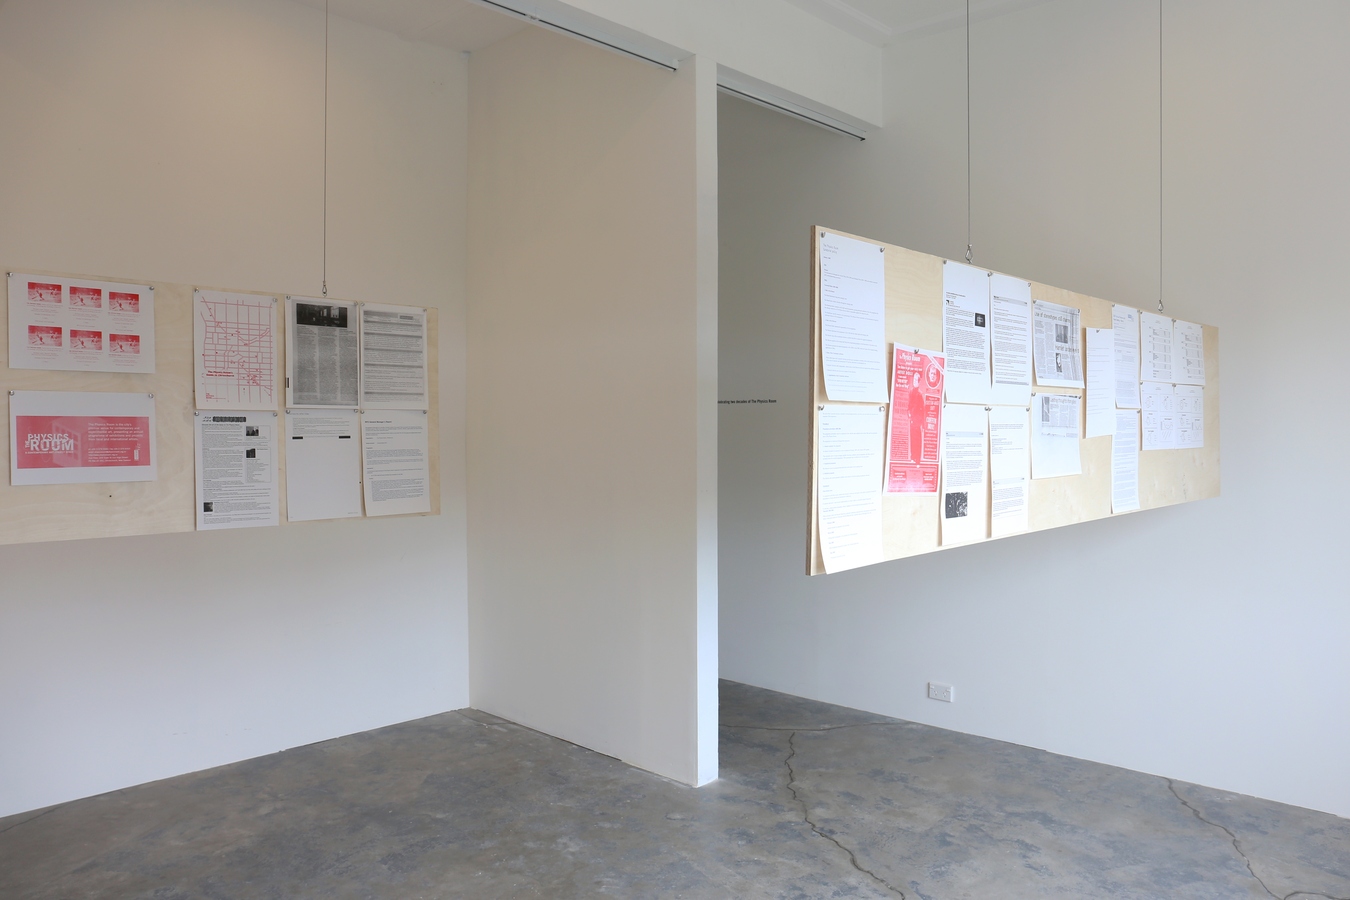 Installation view of Dossier: A working archival exhibition celebrating two decades of The Physics Room, 2017. Image: Daegan Wells.